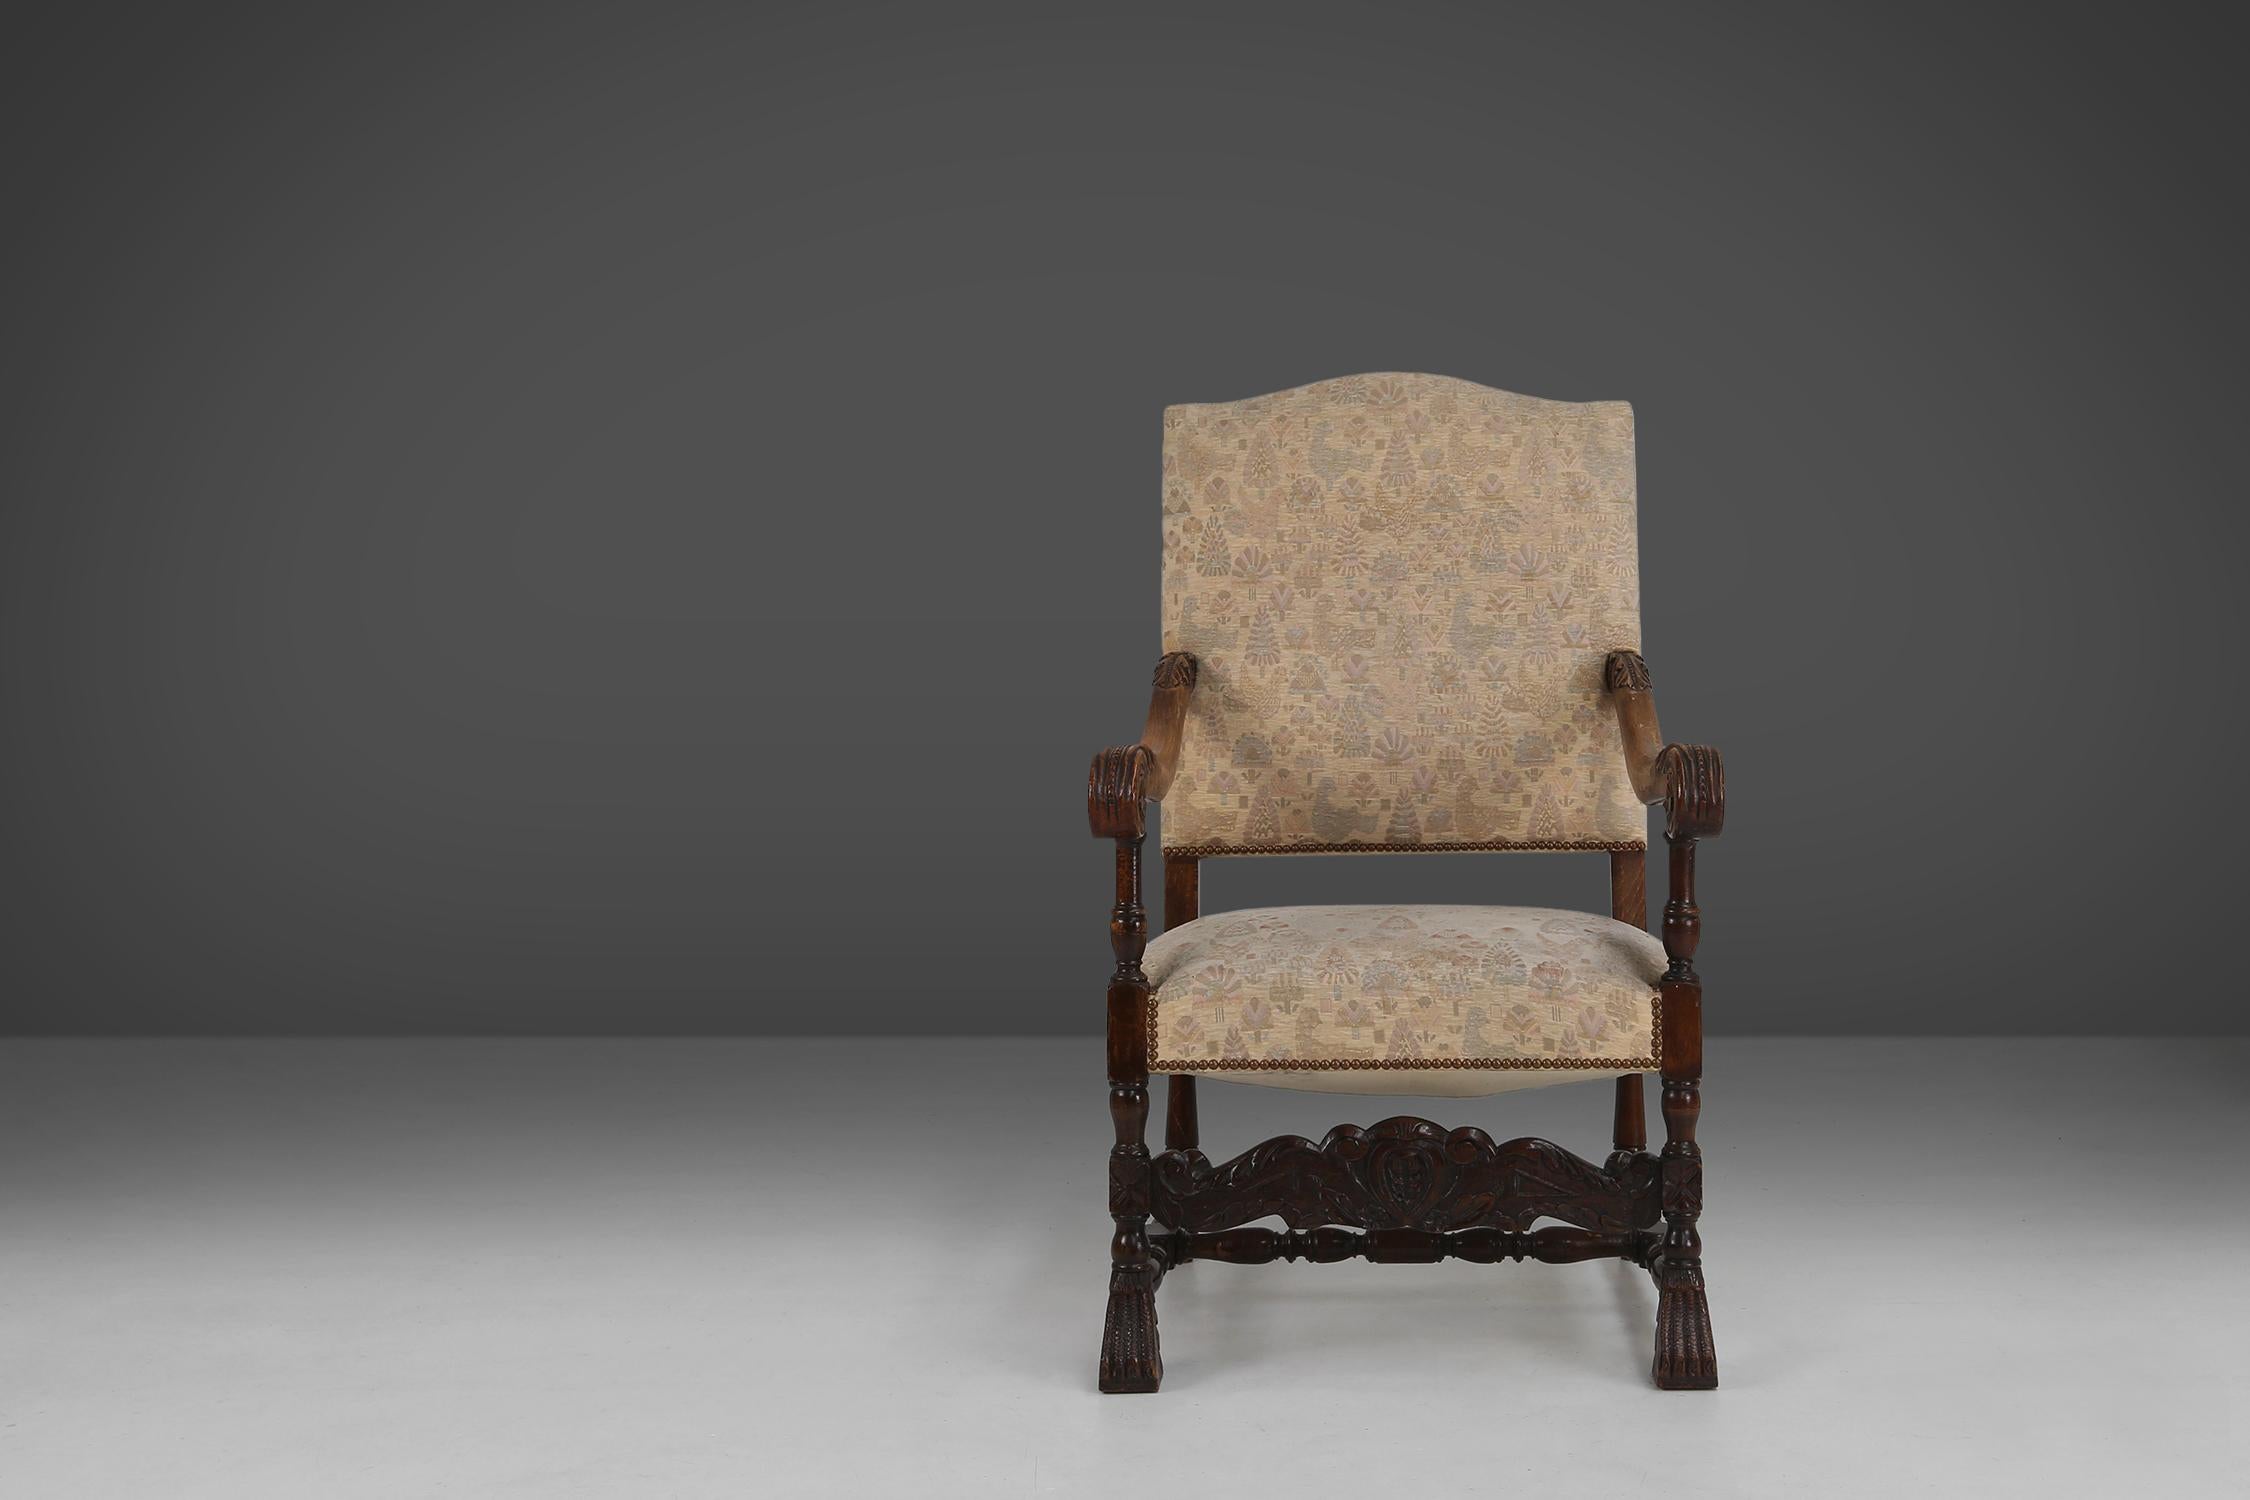 This 19th-century magnificent throne chair is made of oak wood and upholstered in fabric with an ornate motif.

The wood is decorated with fine Renaissance-style sculpting, which shows craftsmanship and taste. The chair has a high back and armrests,